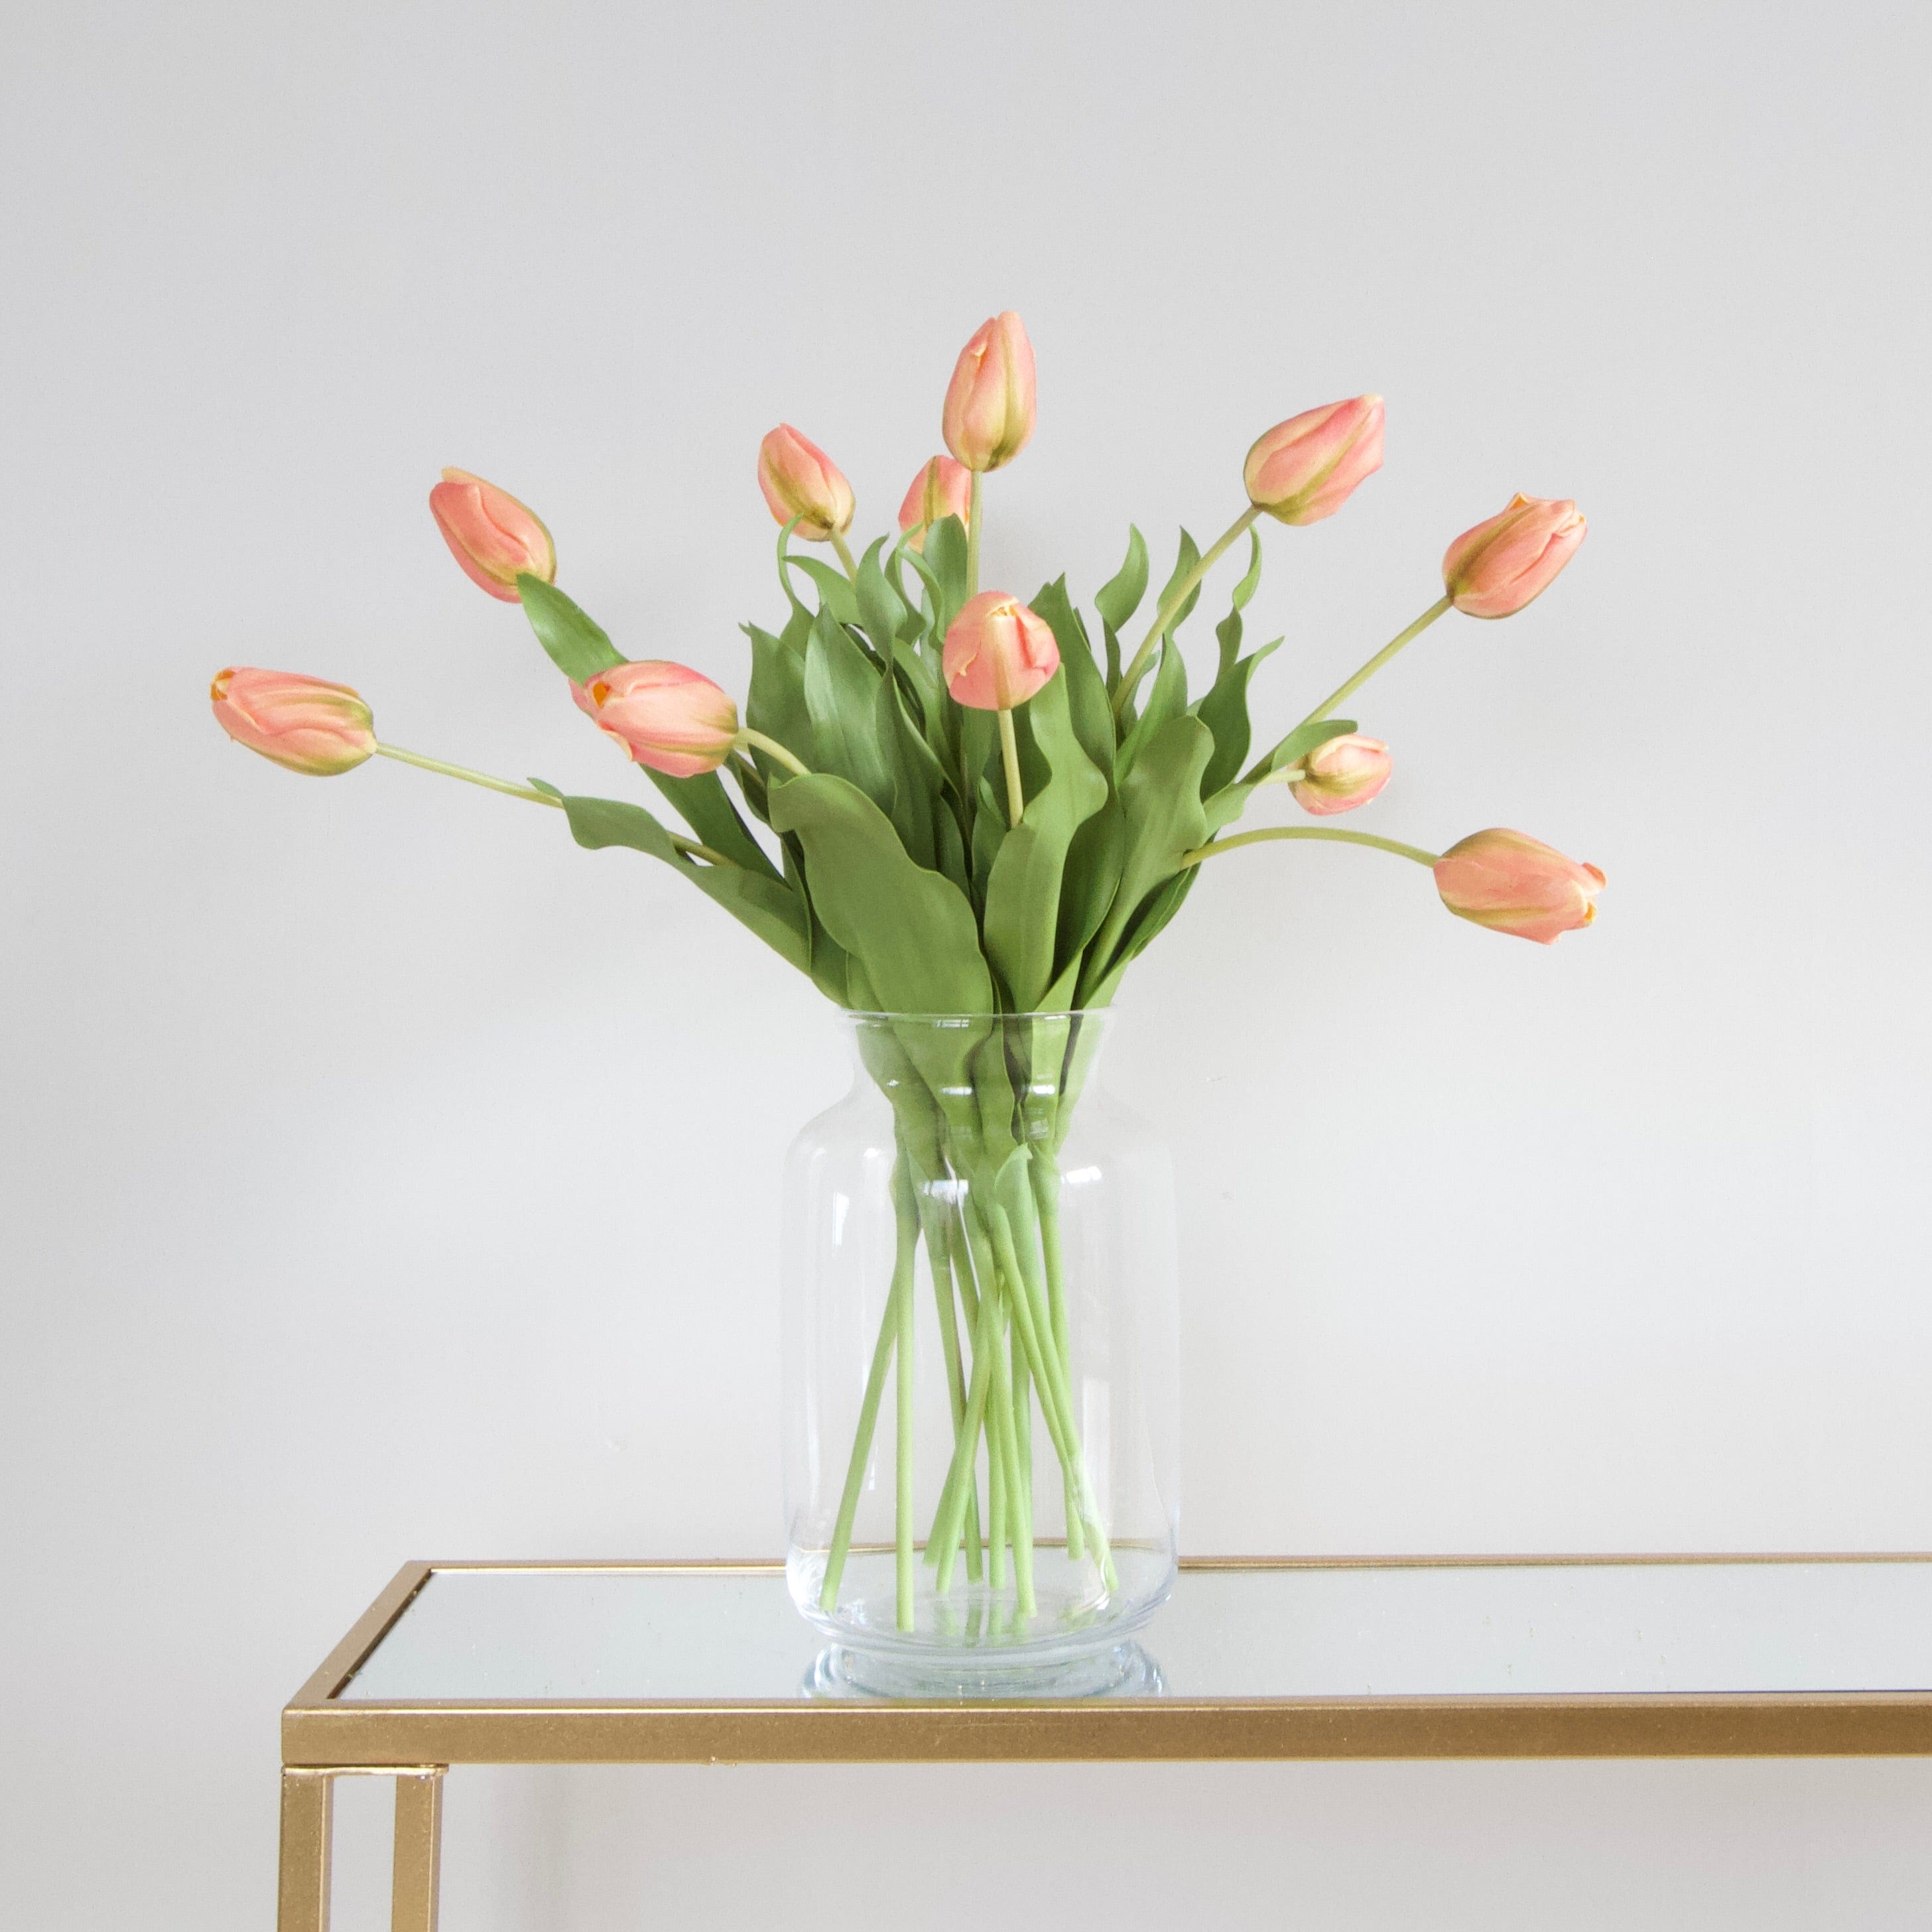 Luxury Lifelike Realistic Artificial Fabric Silk Blooms with Foliage Buy Online from The Faux Flower Company | 12 stems Orange Tulip ABY5657OR styled in Glass Funnel Neck Vase 